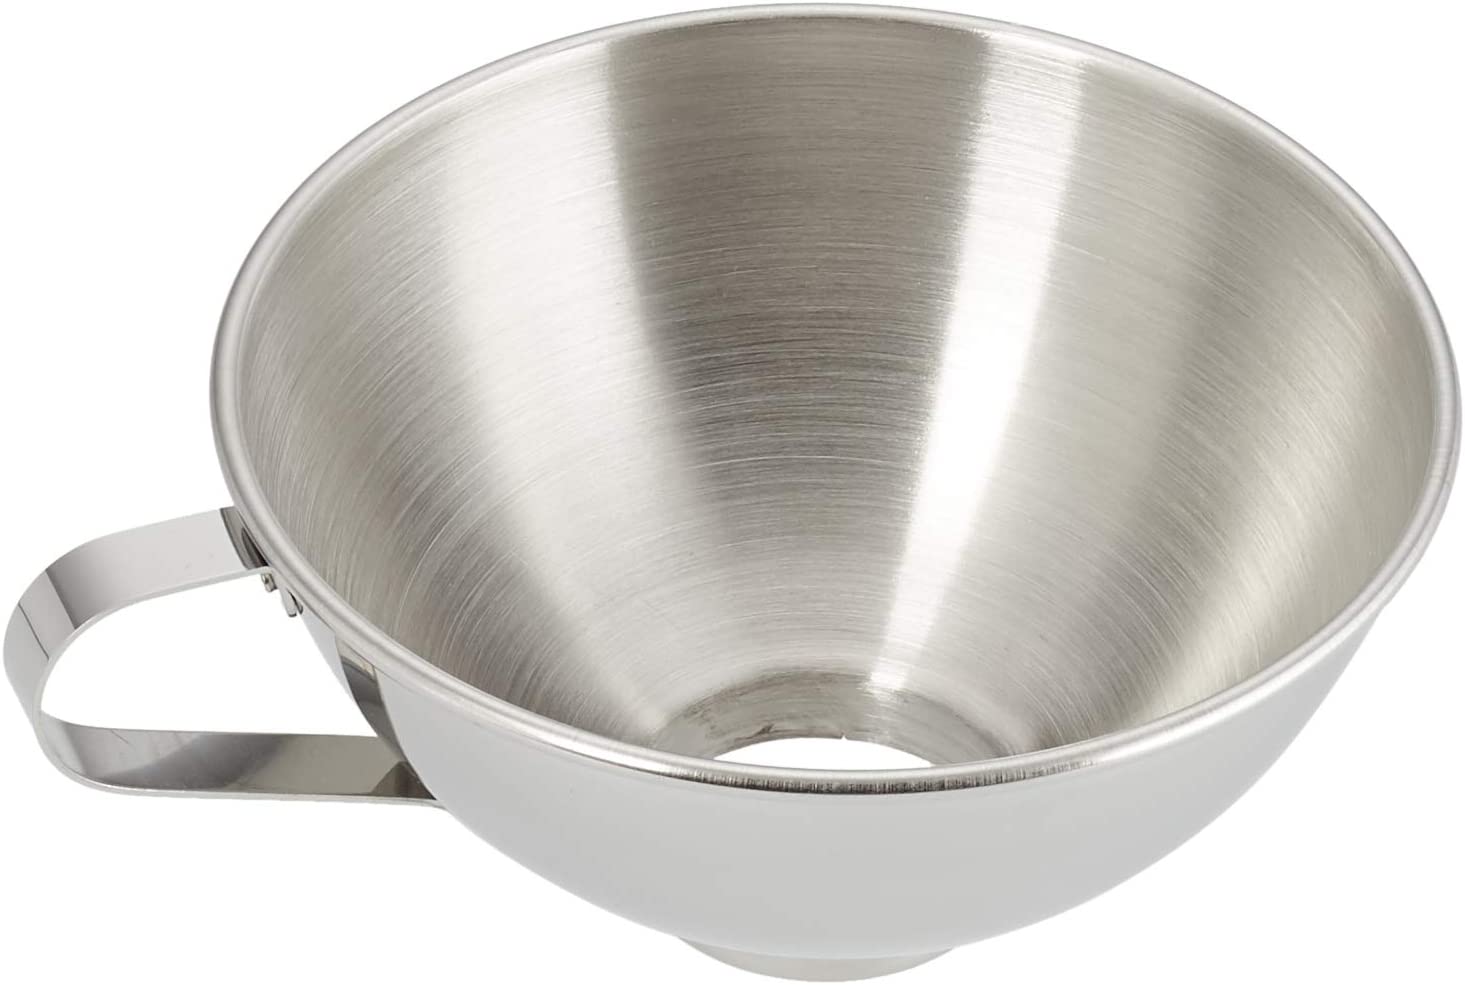 Städter 625365 Dessert Shapes Filling Funnel – Stainless Steel, Silver, 11 x 11 x 5 cm